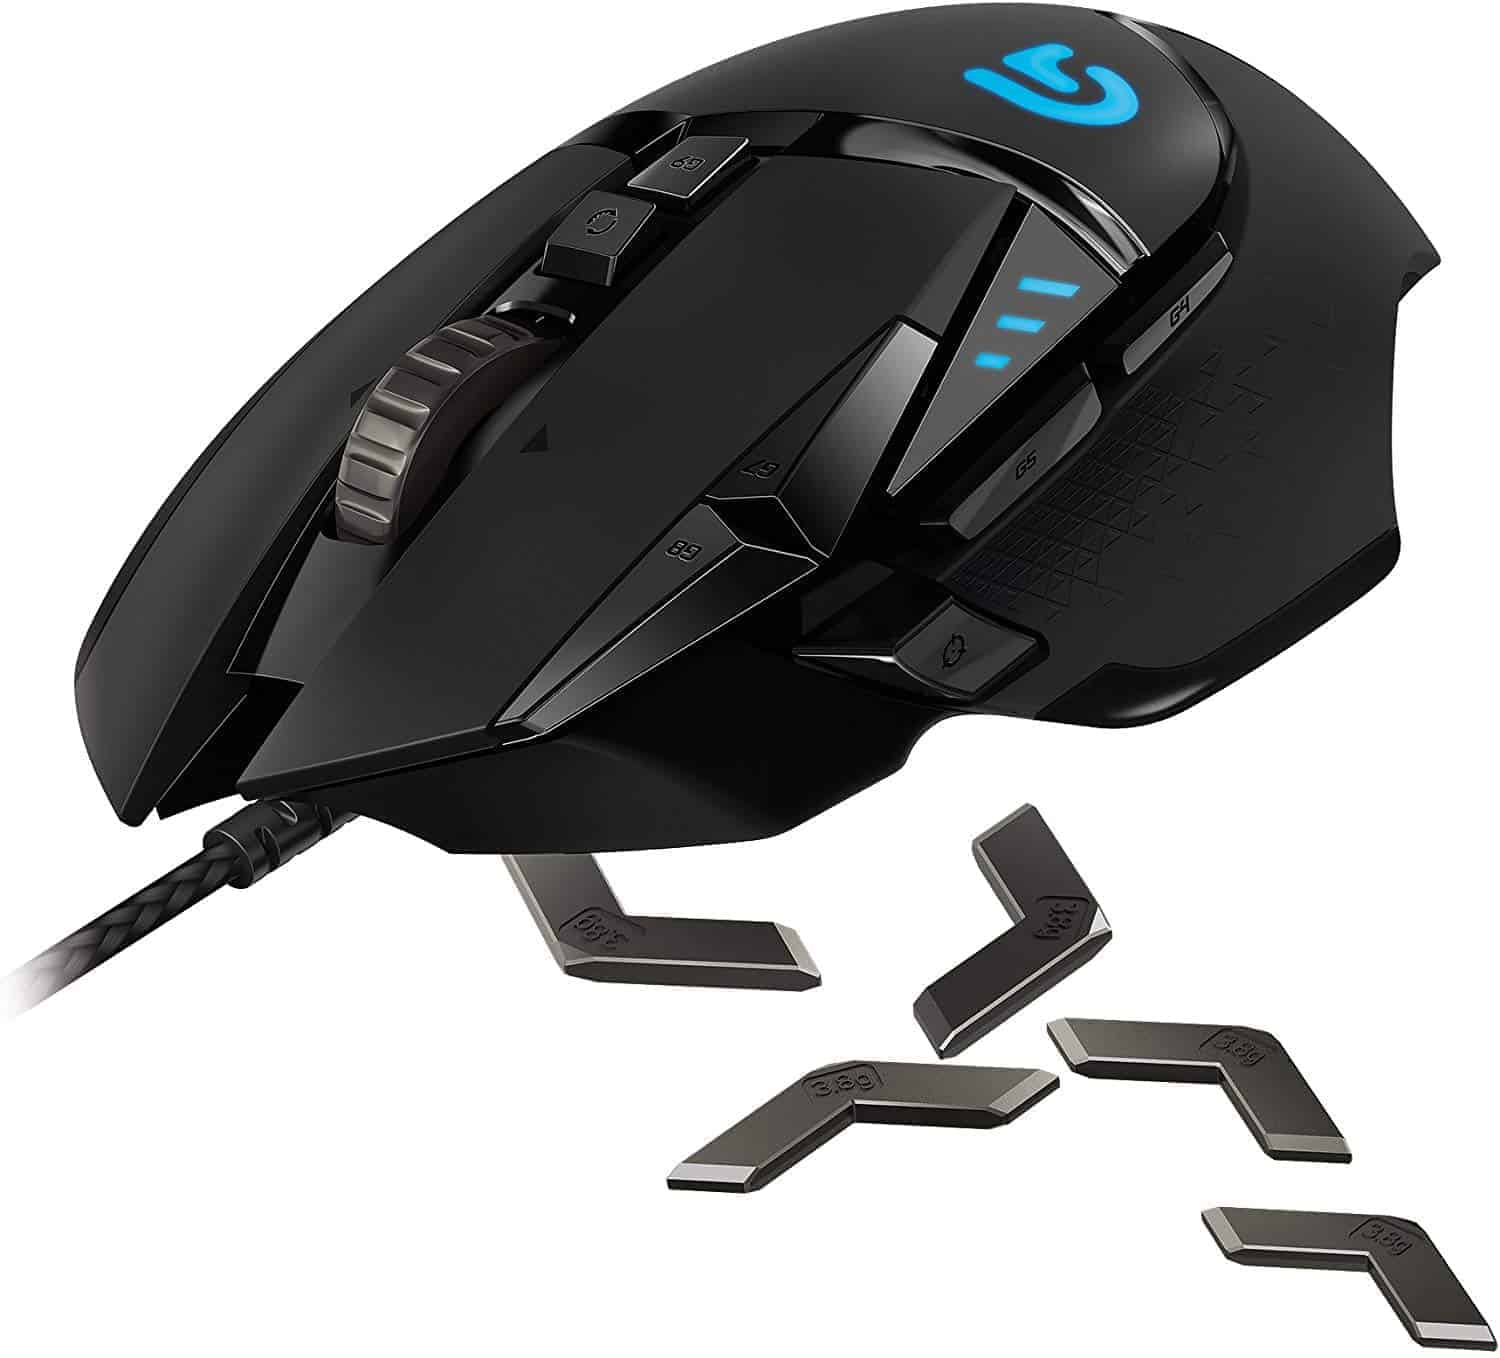 How Much Should a Gaming Mouse Cost - Logitech G502